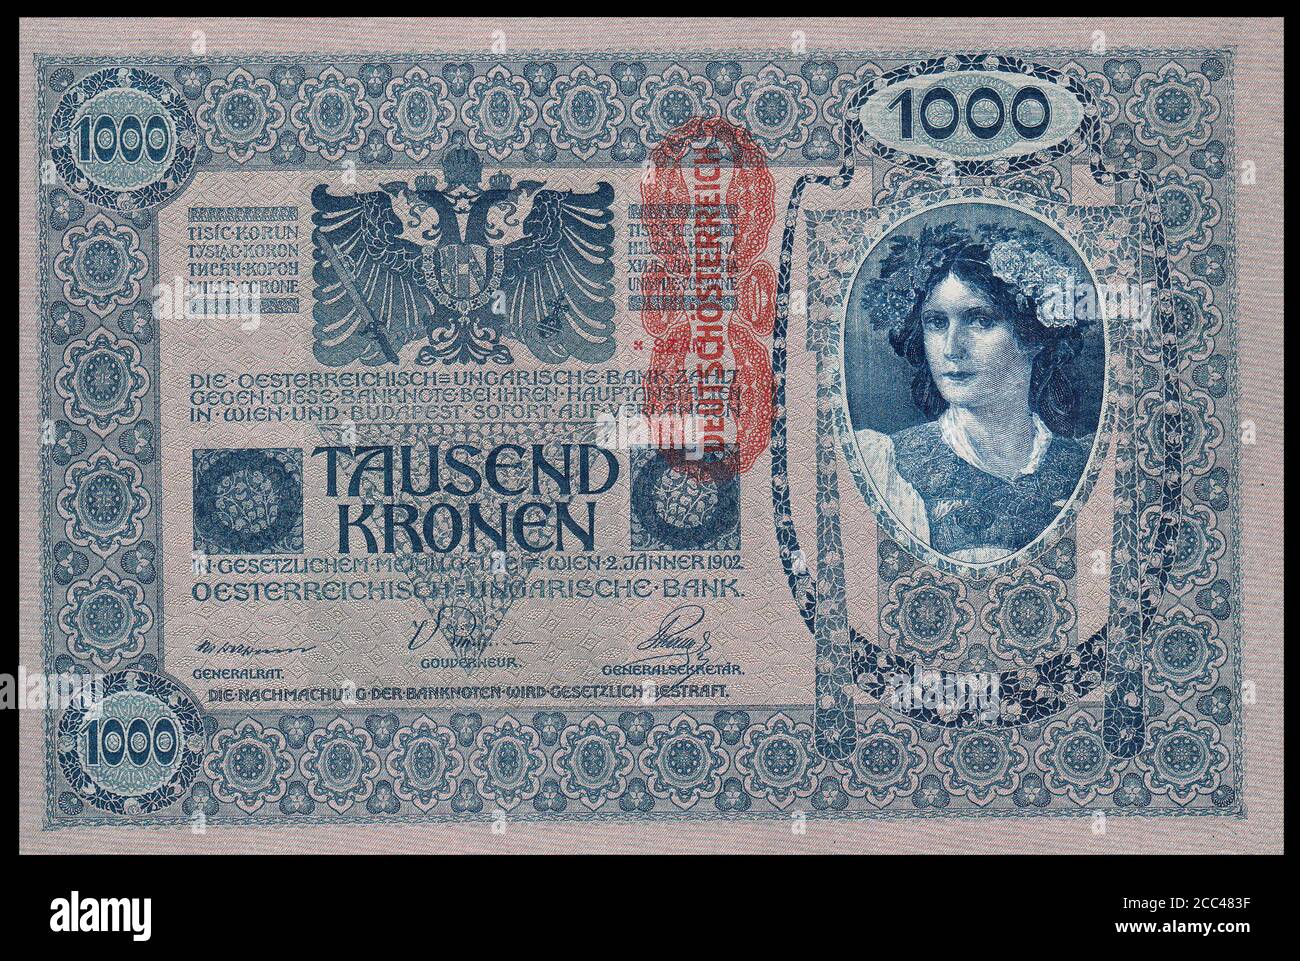 The one thousand crone banknote. Austro-Hubgarian Empire. 1902 Stock Photo